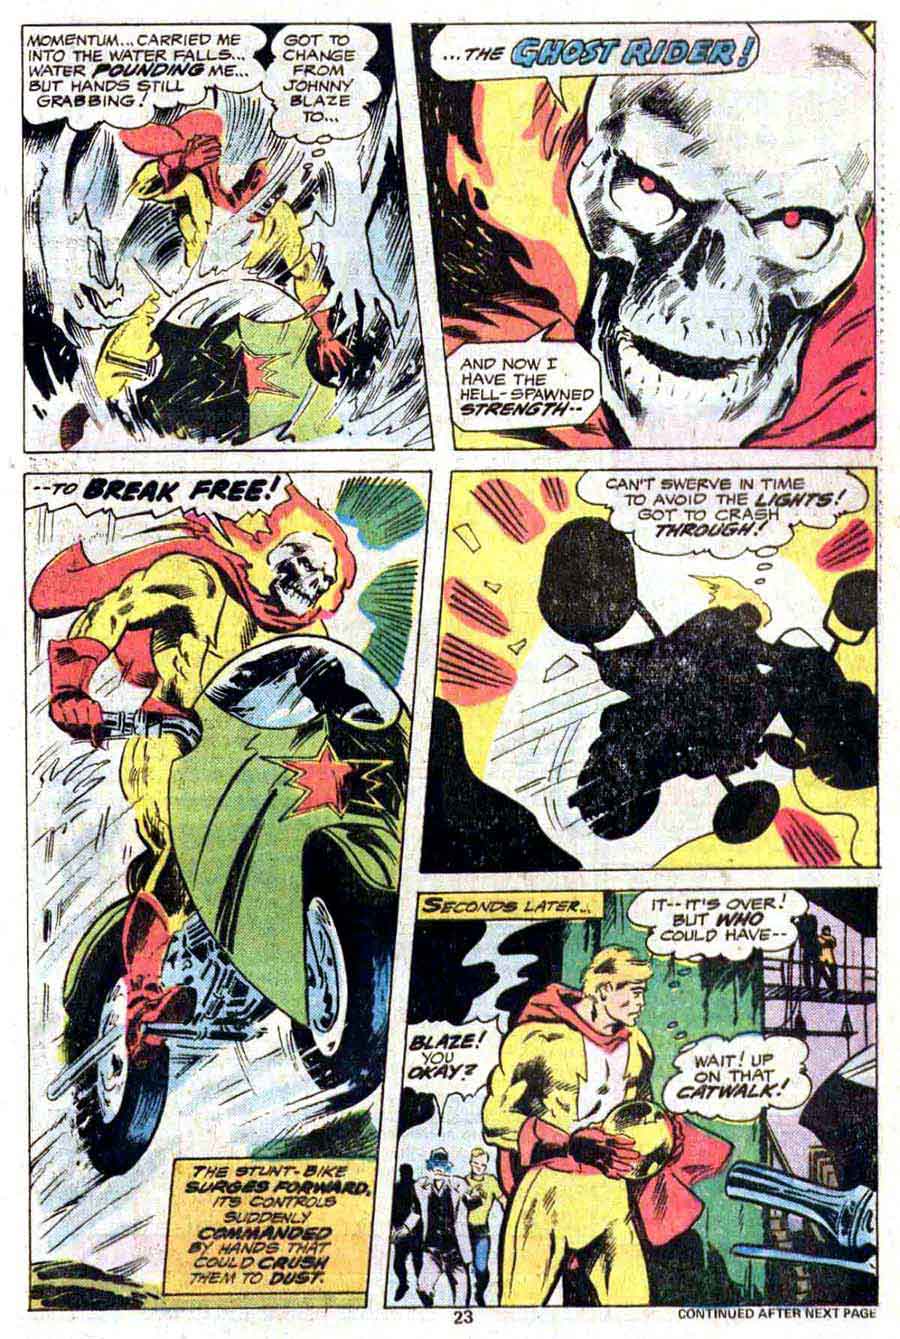 Ghost Rider v3 #23 marvel comic book page art by Don Newton